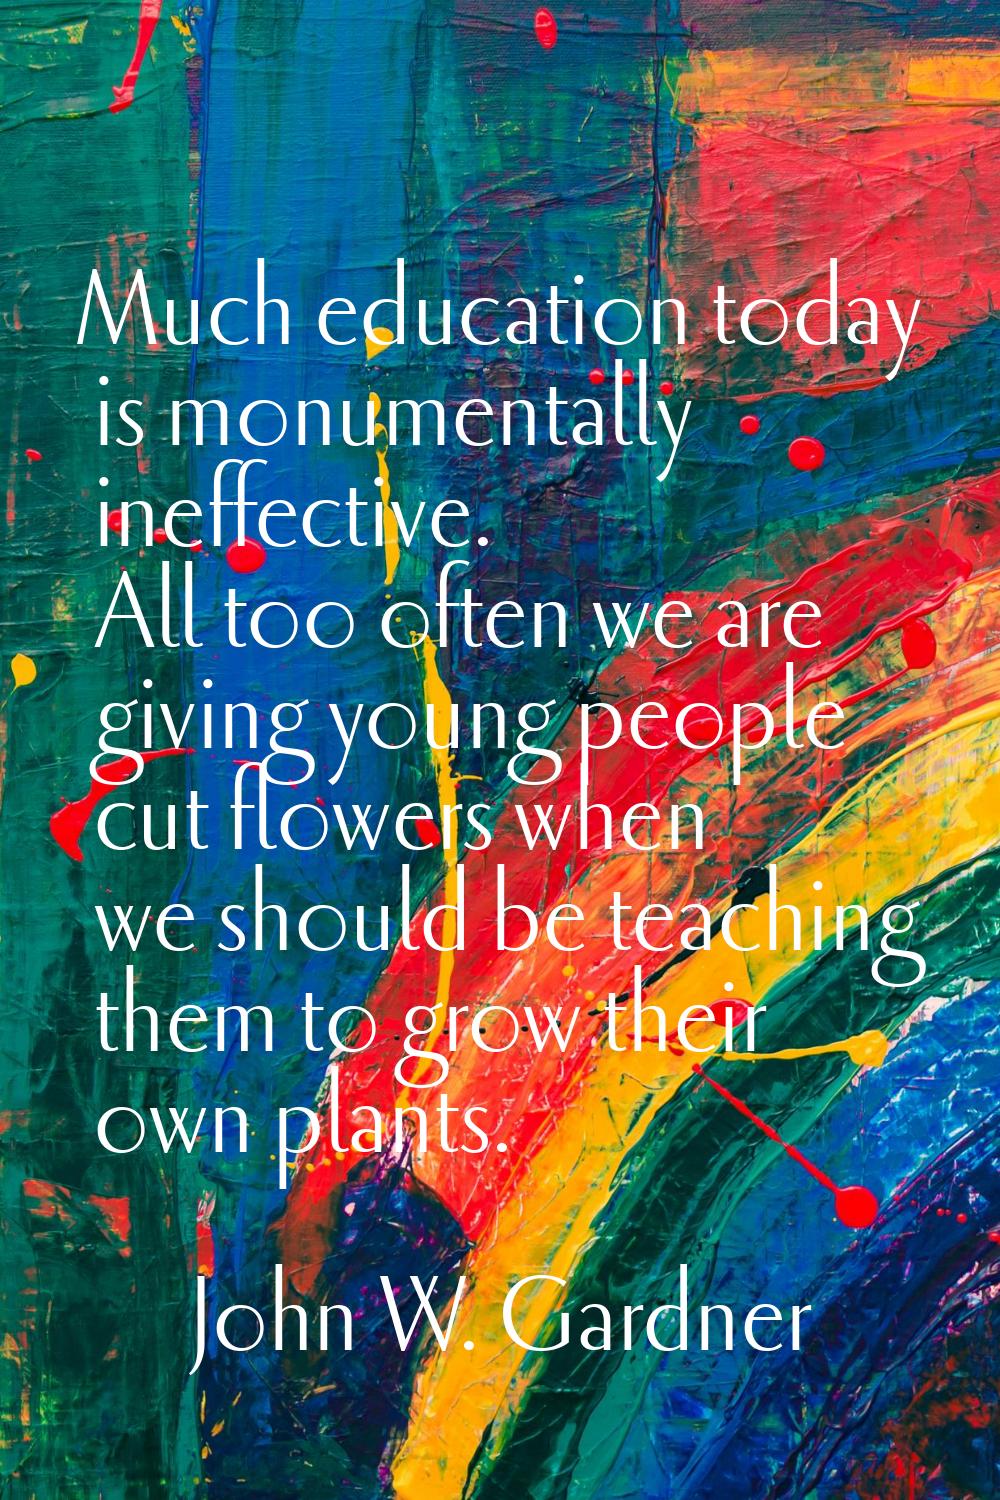 Much education today is monumentally ineffective. All too often we are giving young people cut flow